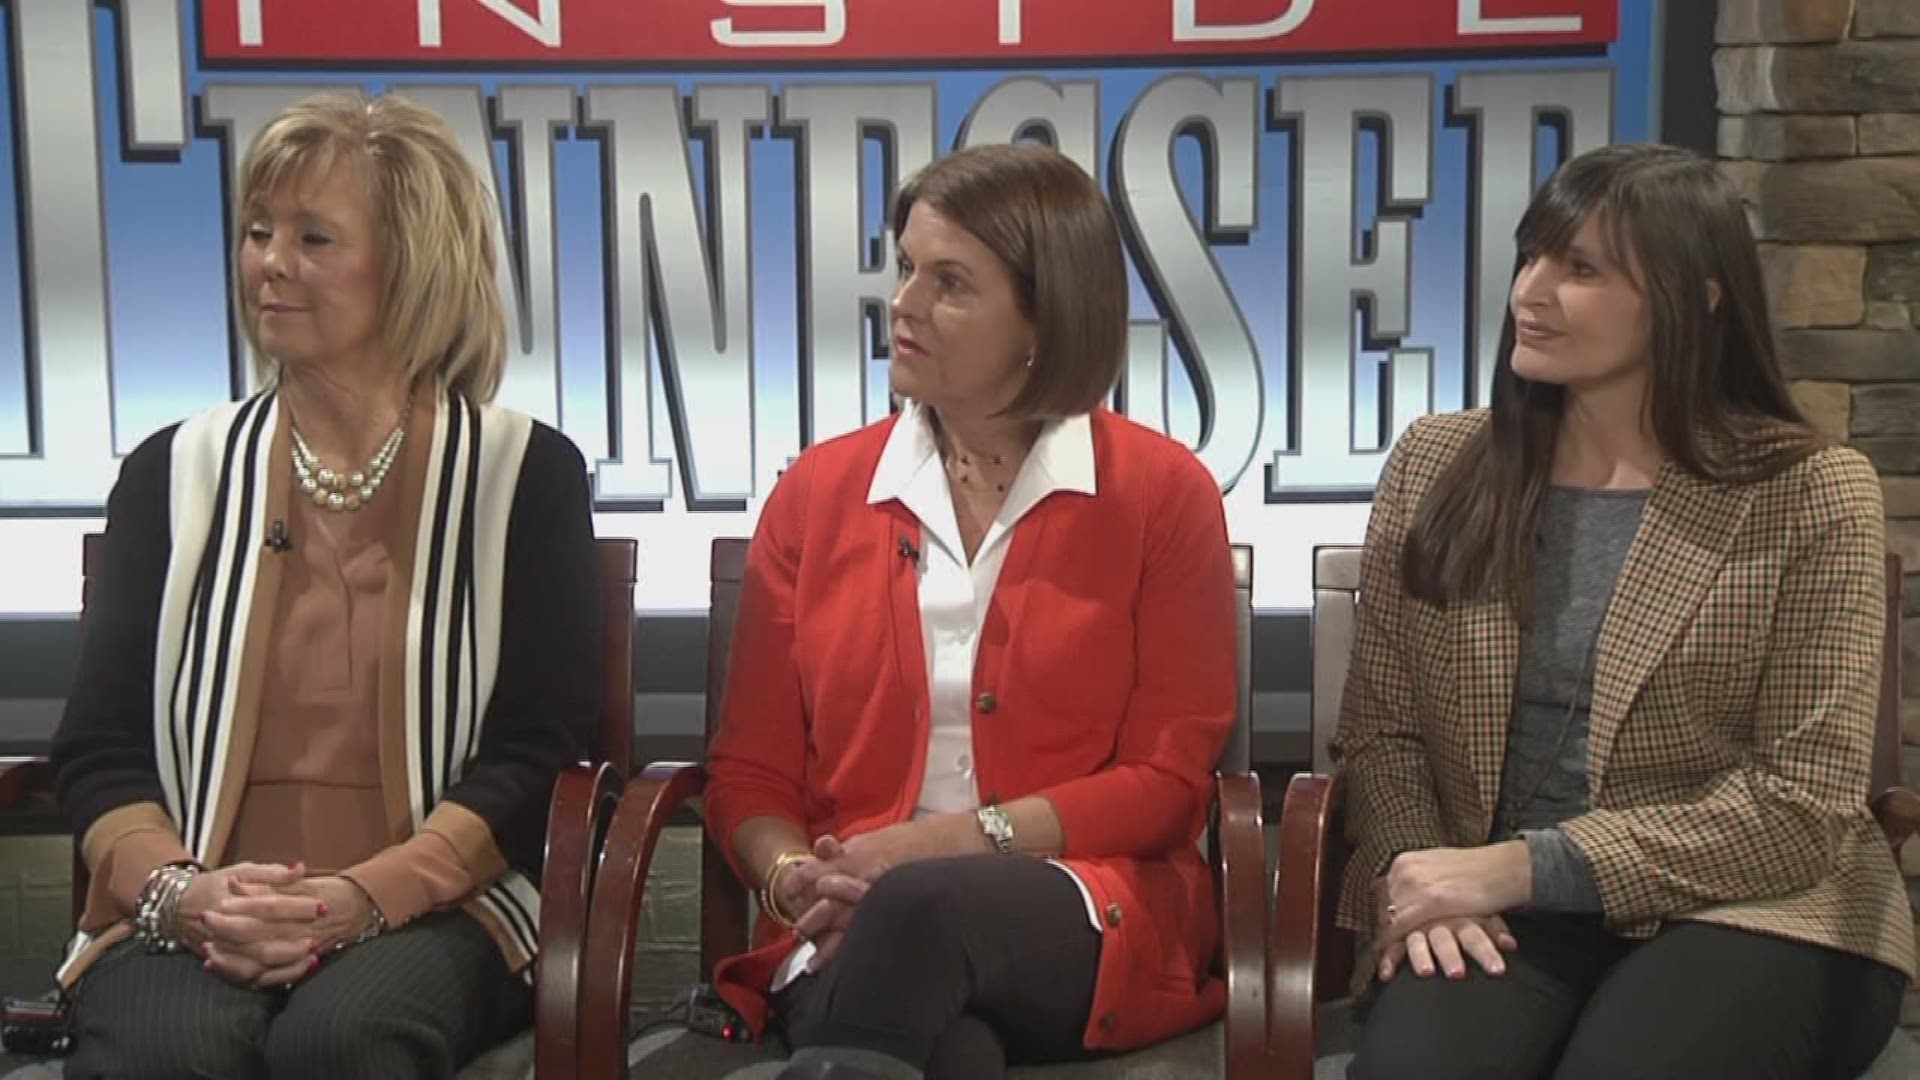 Knox County school board members Patti Bounds, Terry Hill and Susan Horn discuss school system issues.